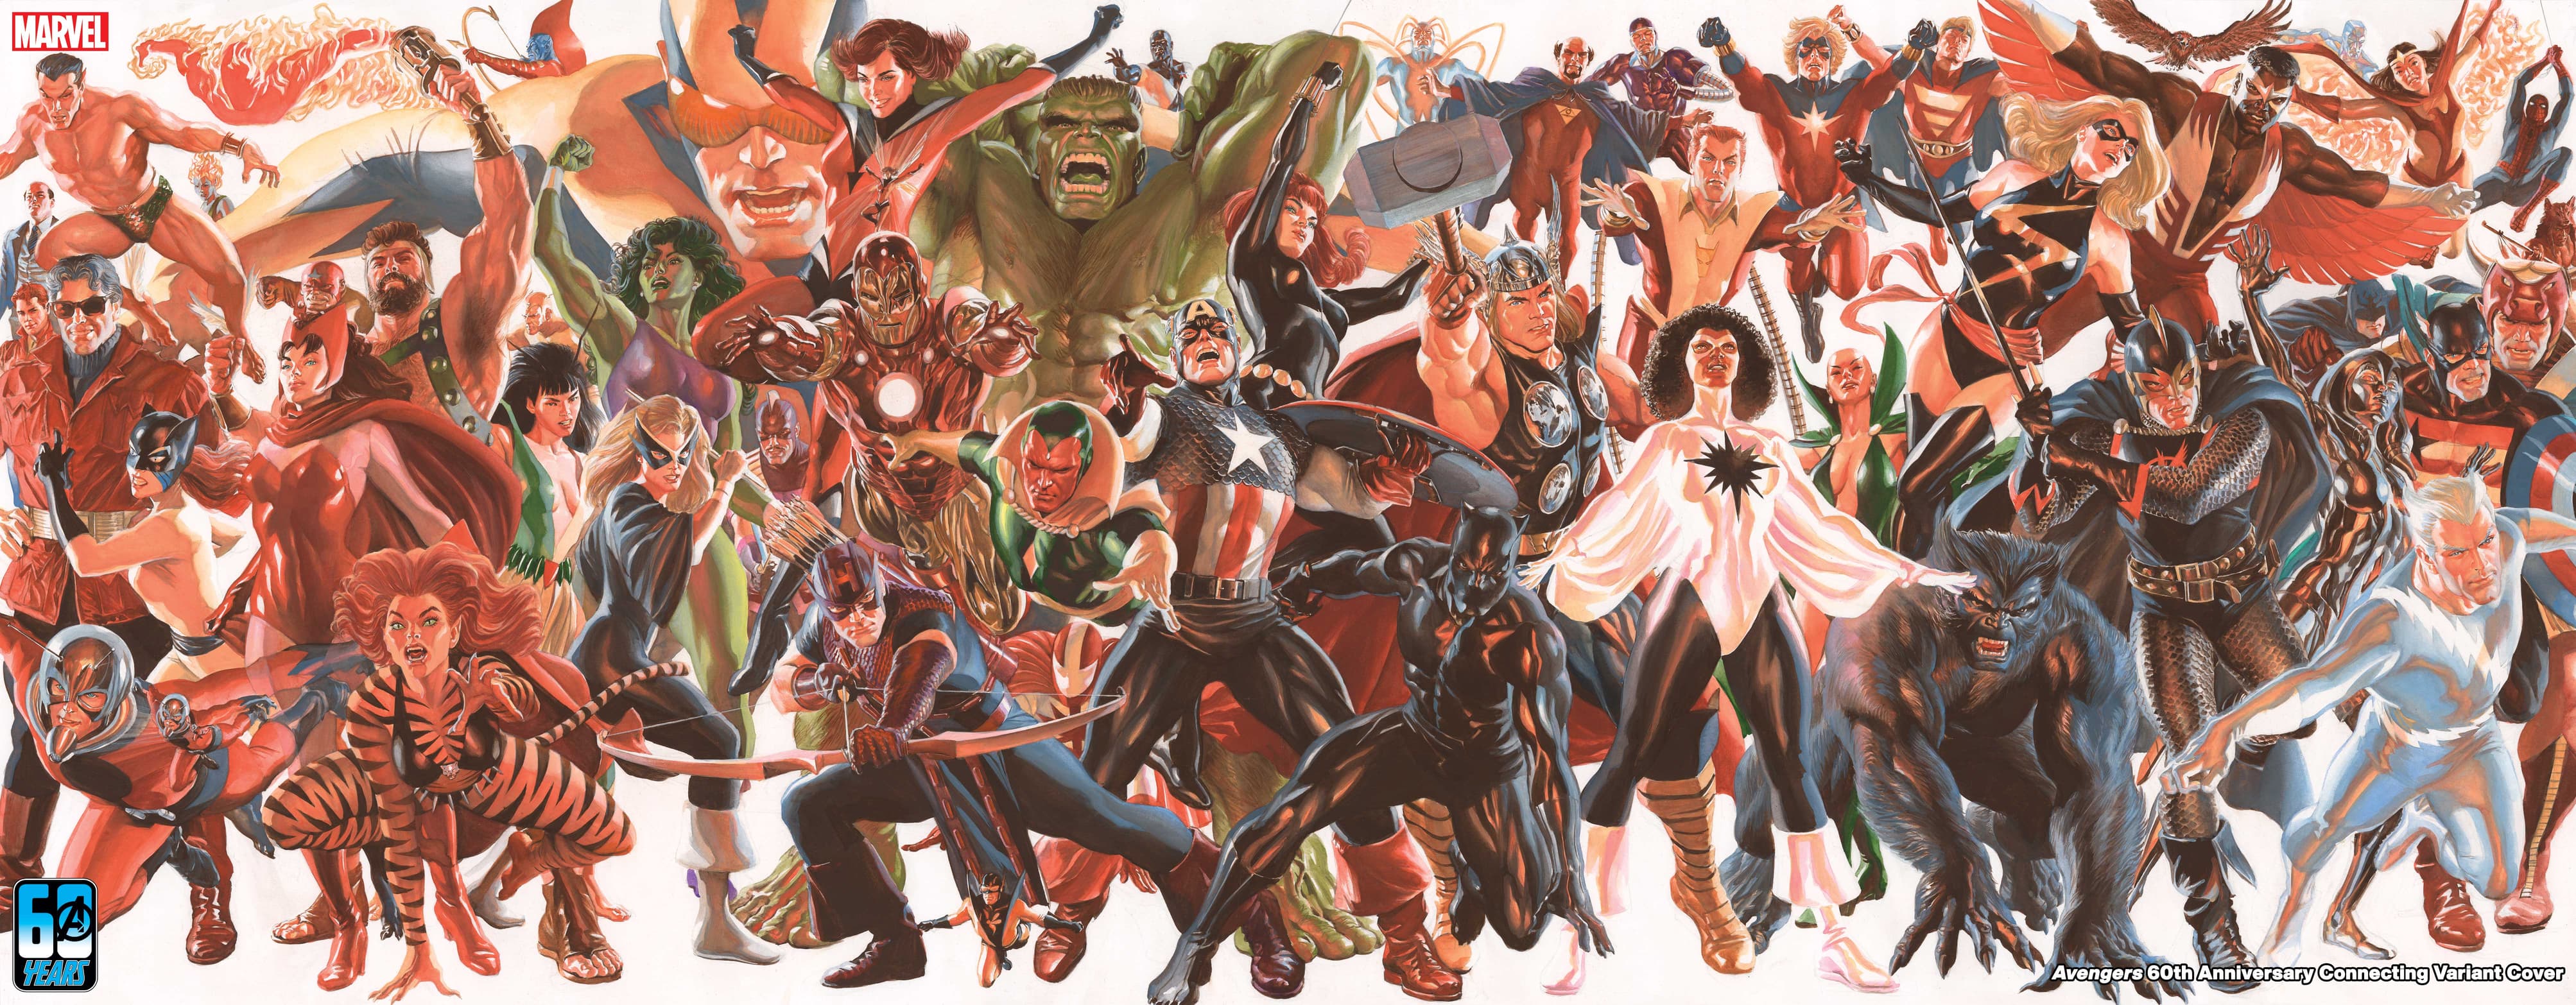 Avengers 60th Connecting Cover by Alex Ross